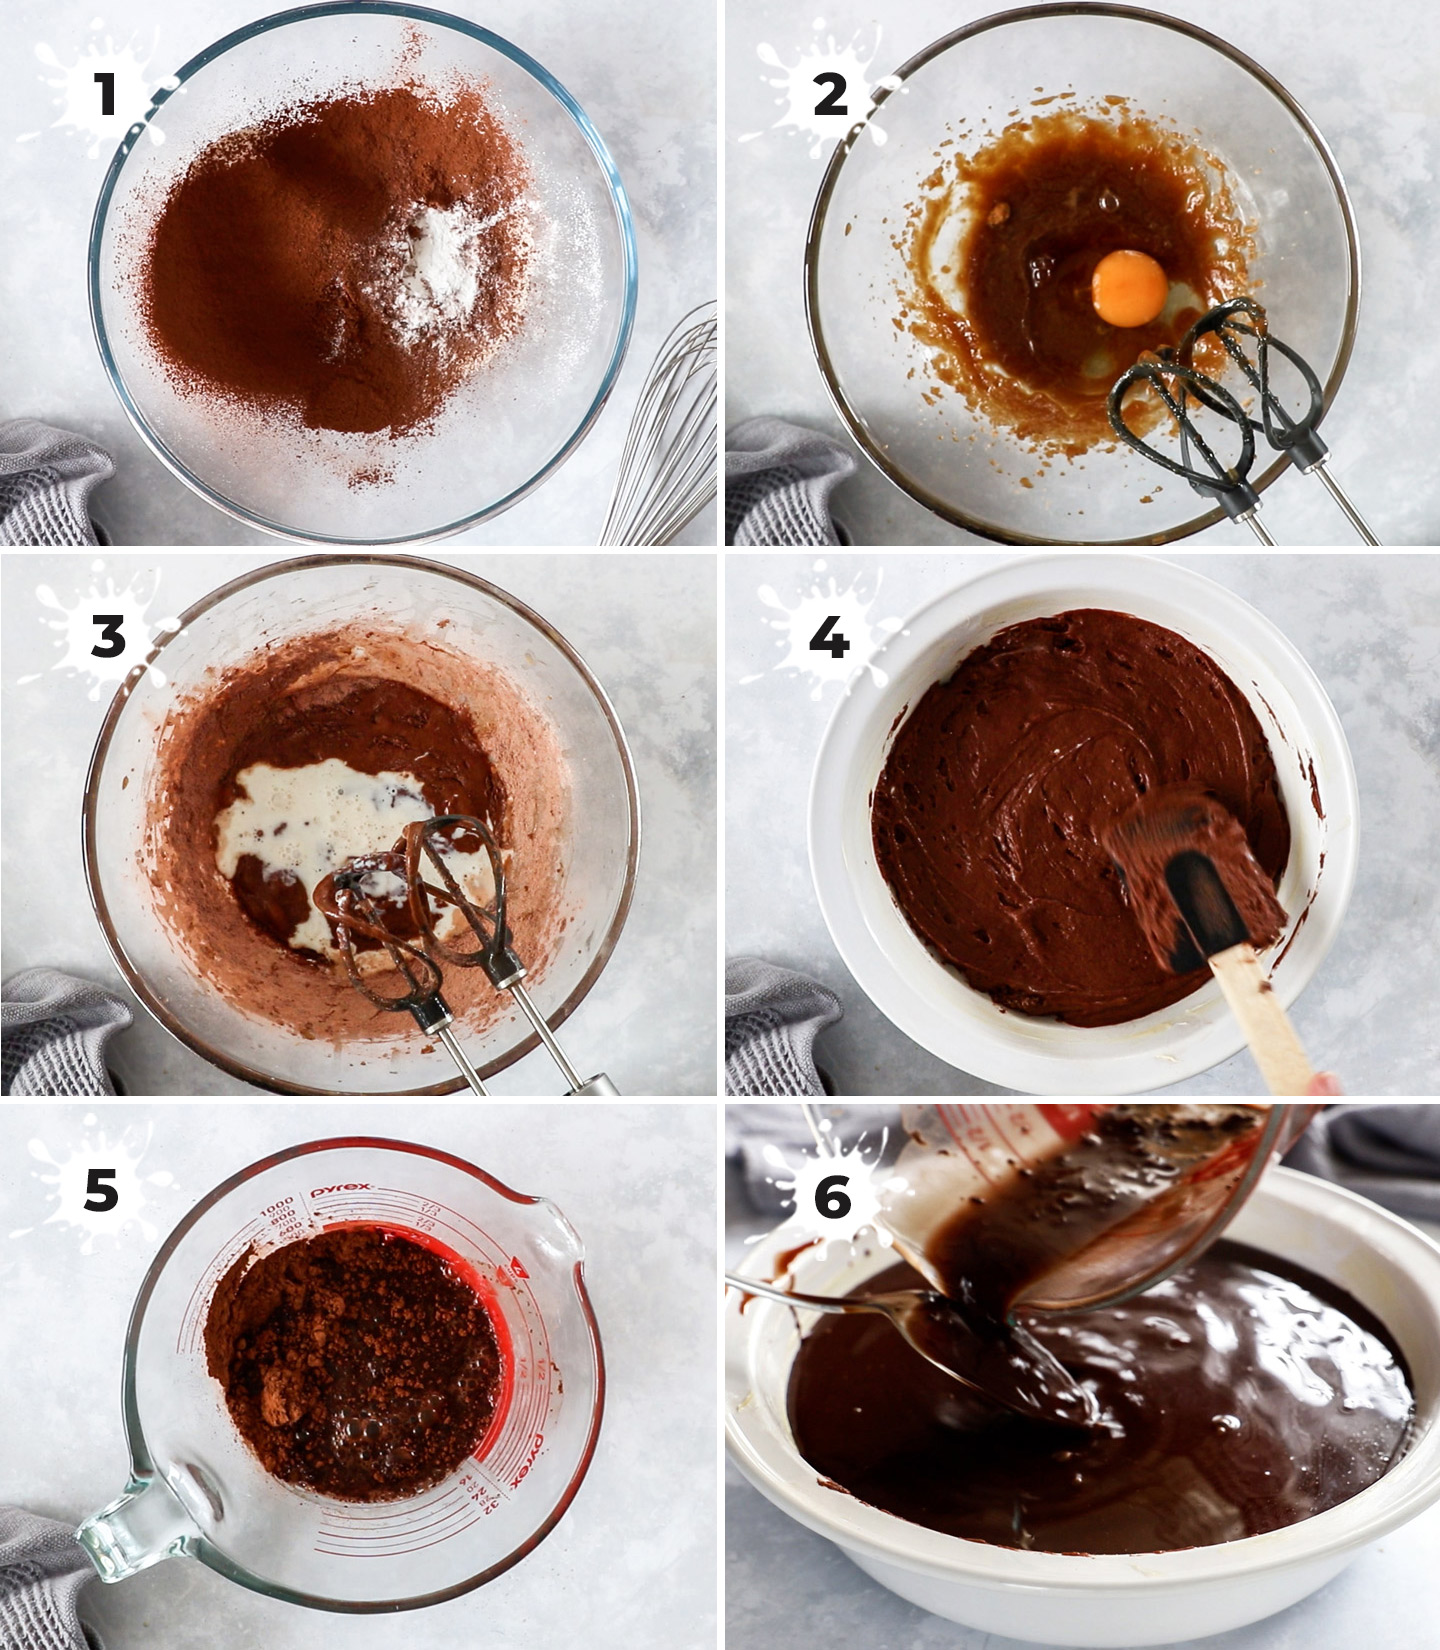 A collage showing the steps to making the pudding.